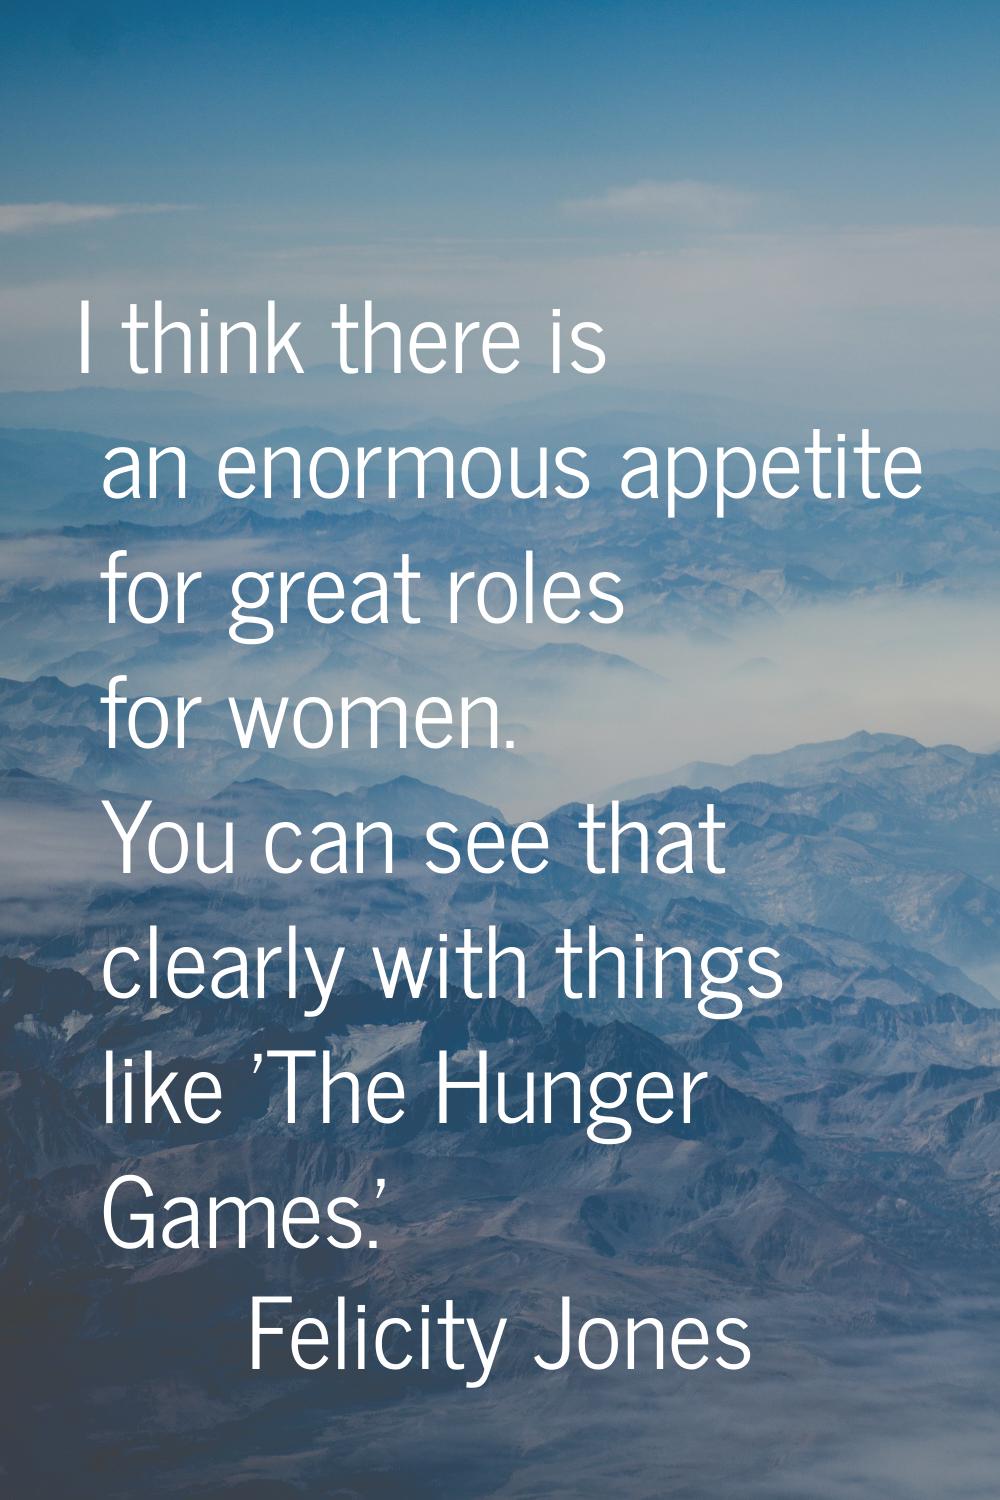 I think there is an enormous appetite for great roles for women. You can see that clearly with thin